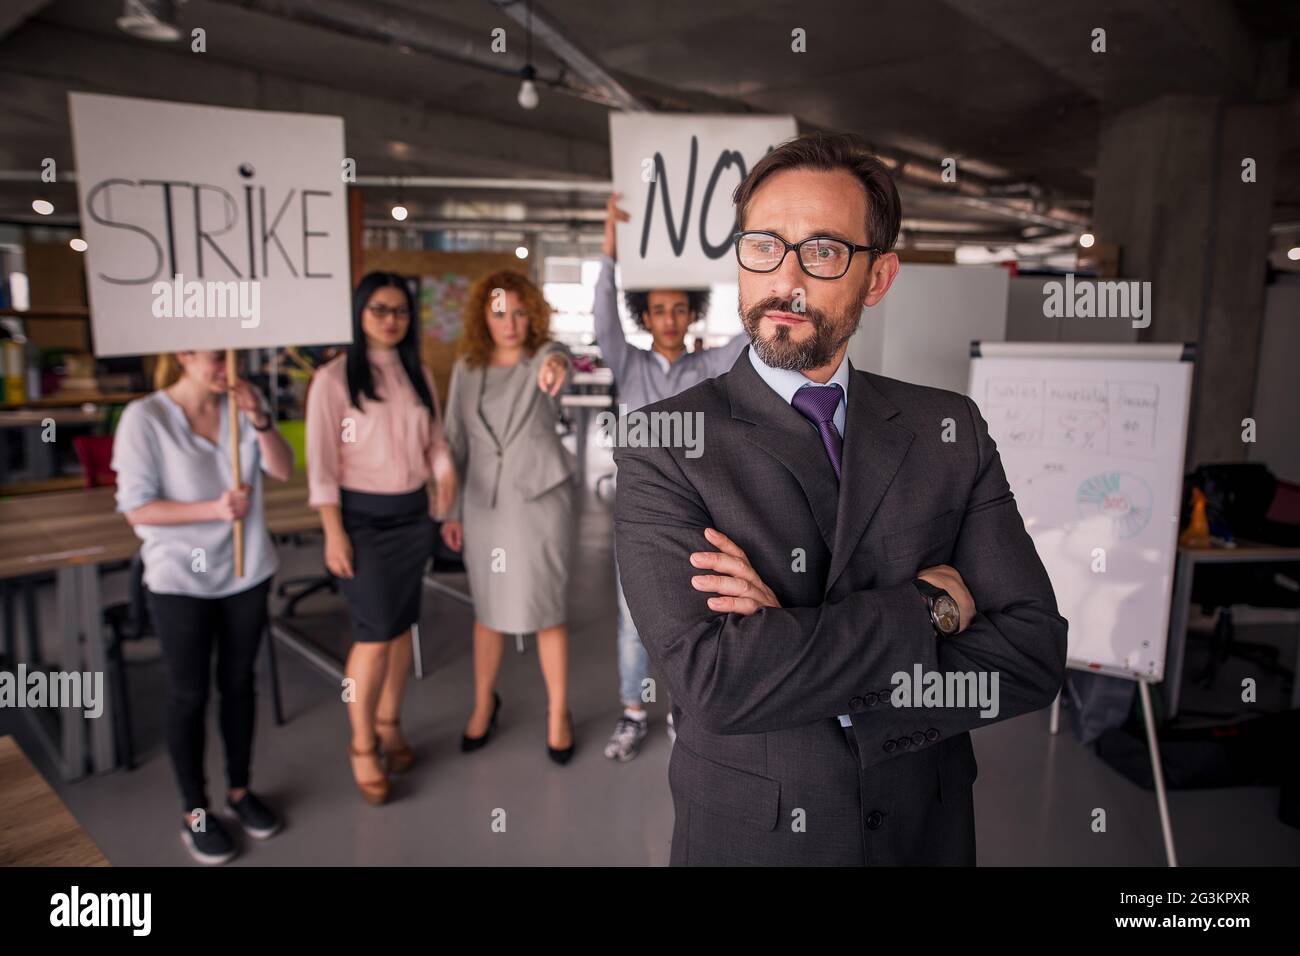 Unsatisfied employees on strike in the office. Stock Photo